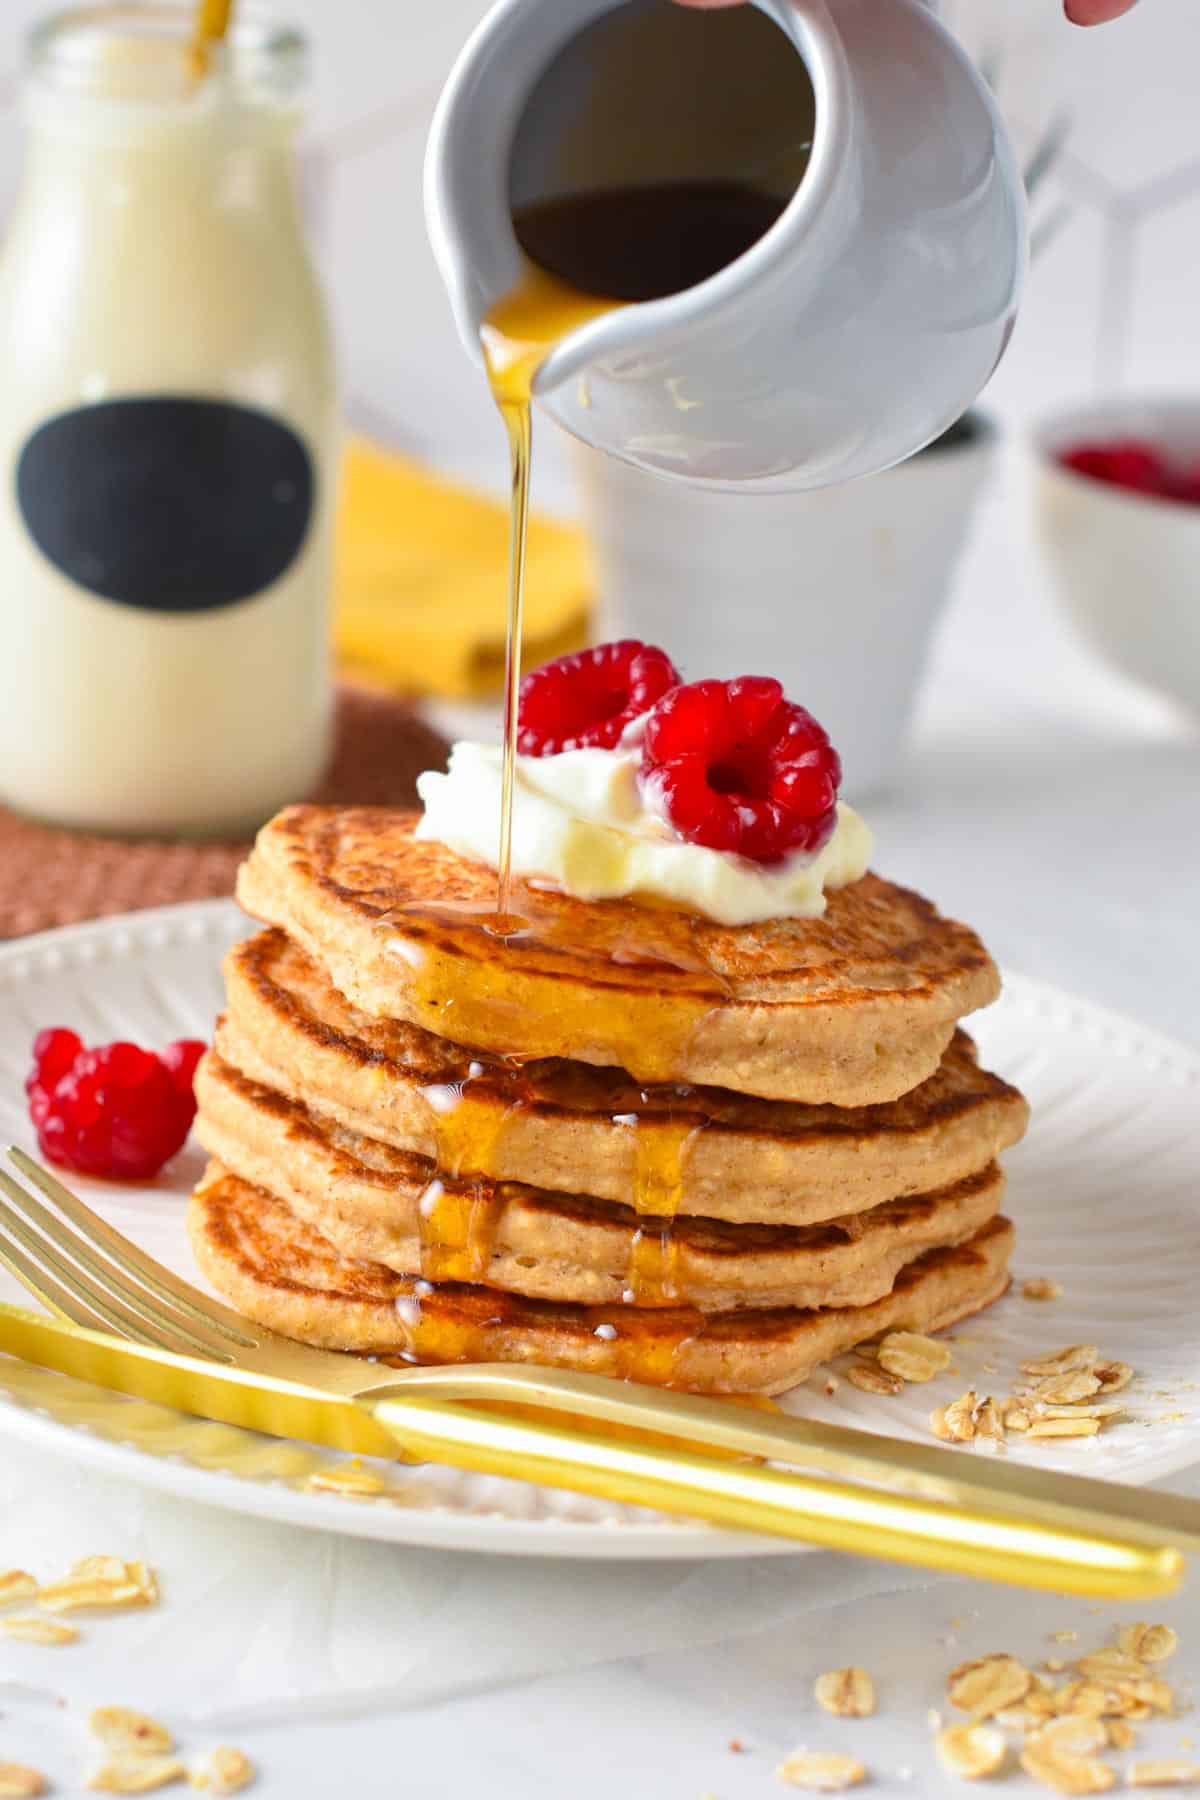 These Greek Yogurt Pancakes are easy, healthy oatmeal yogurt pancakes packed with a bunch of 30 grams of proteins per serves to keep you full for hours.These Greek Yogurt Pancakes are easy, healthy oatmeal yogurt pancakes packed with a bunch of 30 grams of proteins per serves to keep you full for hours.